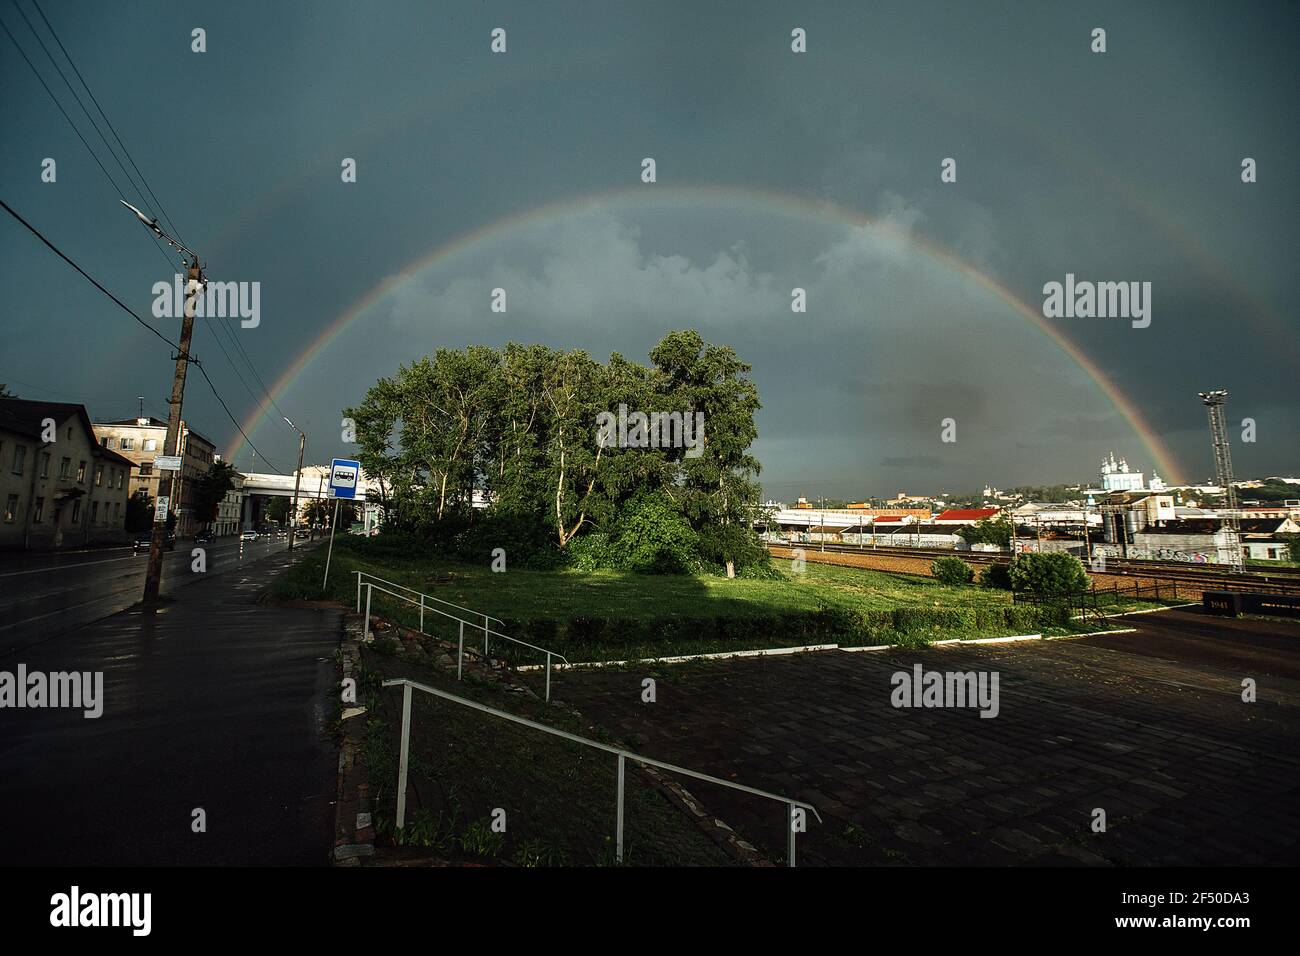 rainbow in the sky over the city after the rain. an old steam locomotive stands at the railway station Stock Photo